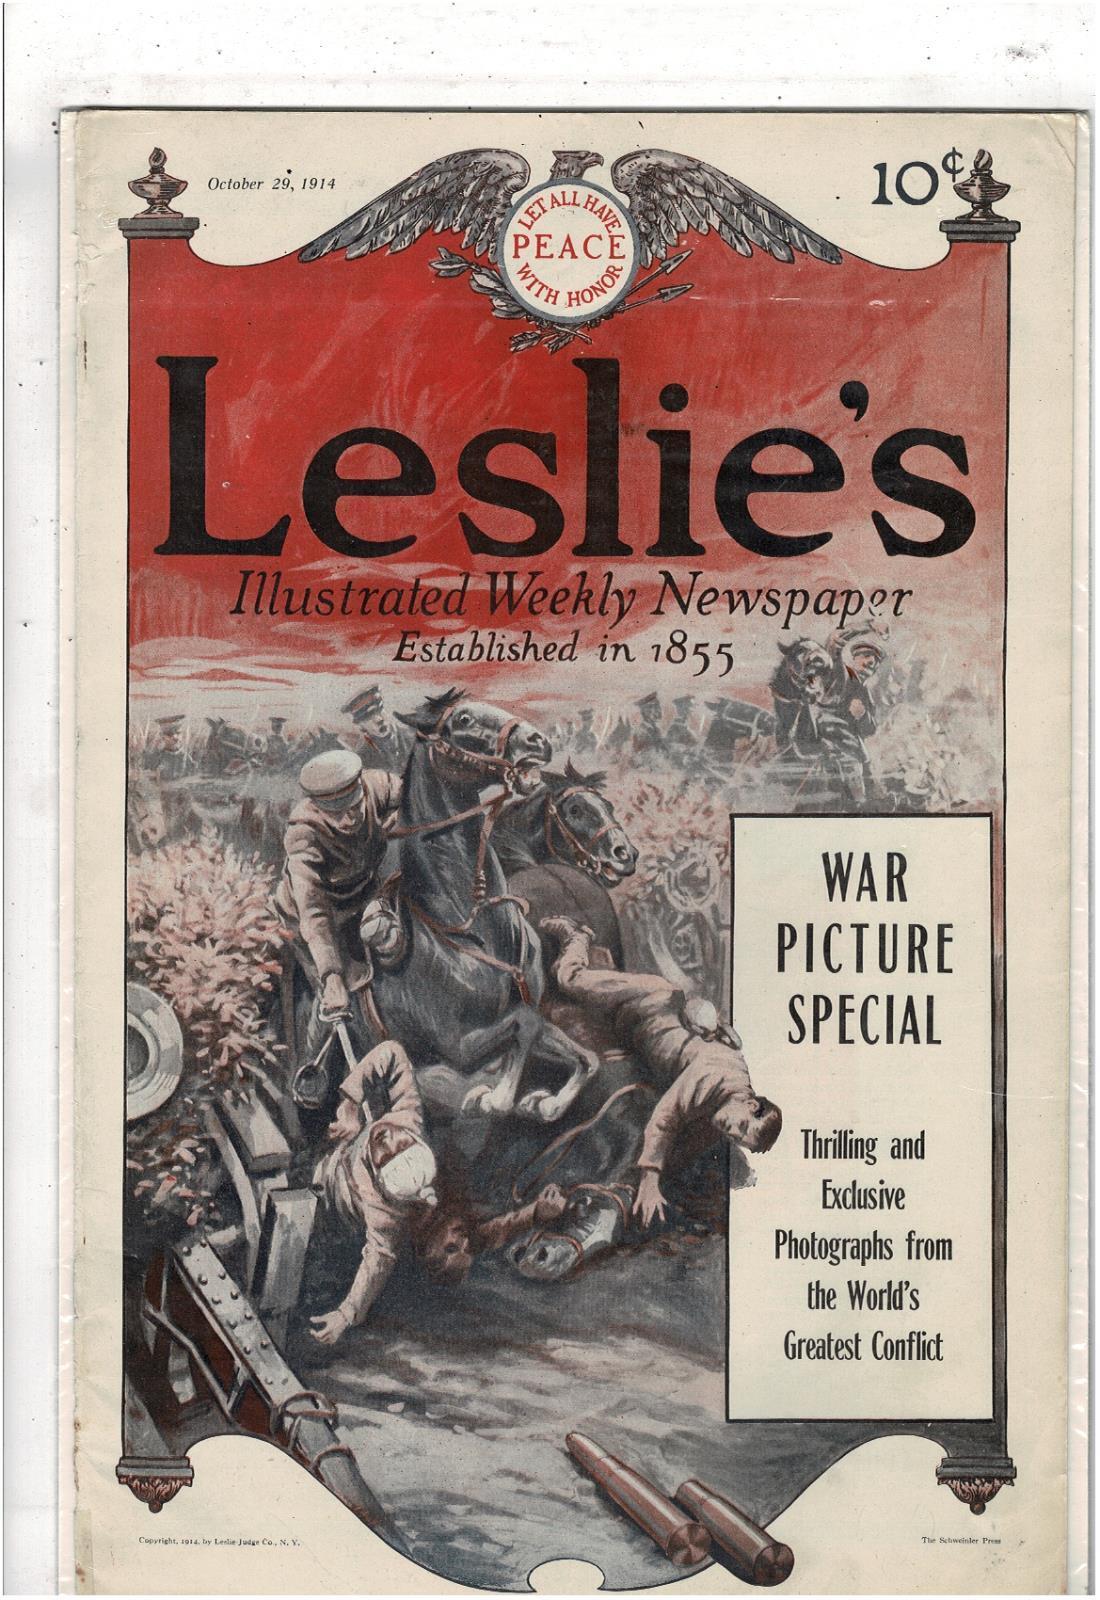 RARE OCT 29 1914 LESLIE'S WEEKLY NEWS PAPER WAR PICTURE SPECIAL GREAT ADS MS1671